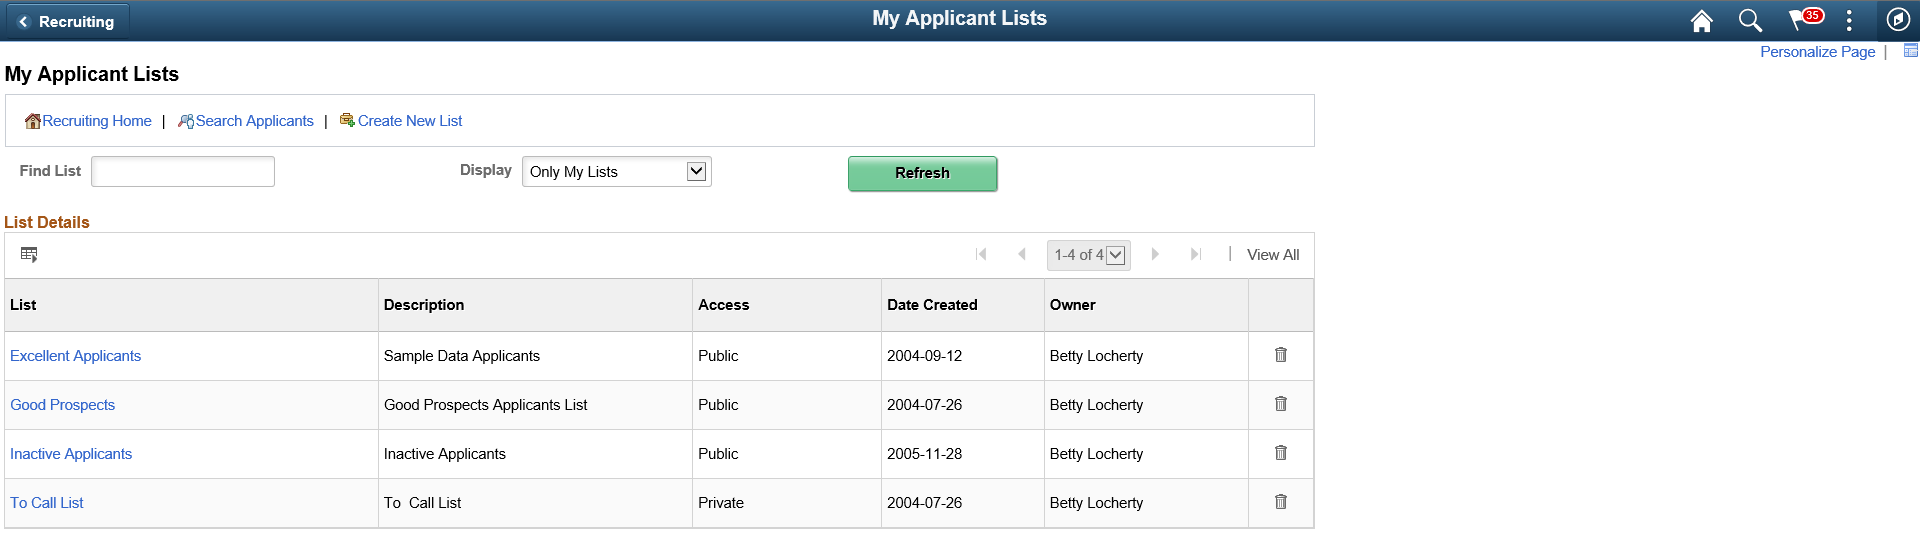 My Applicant Lists page